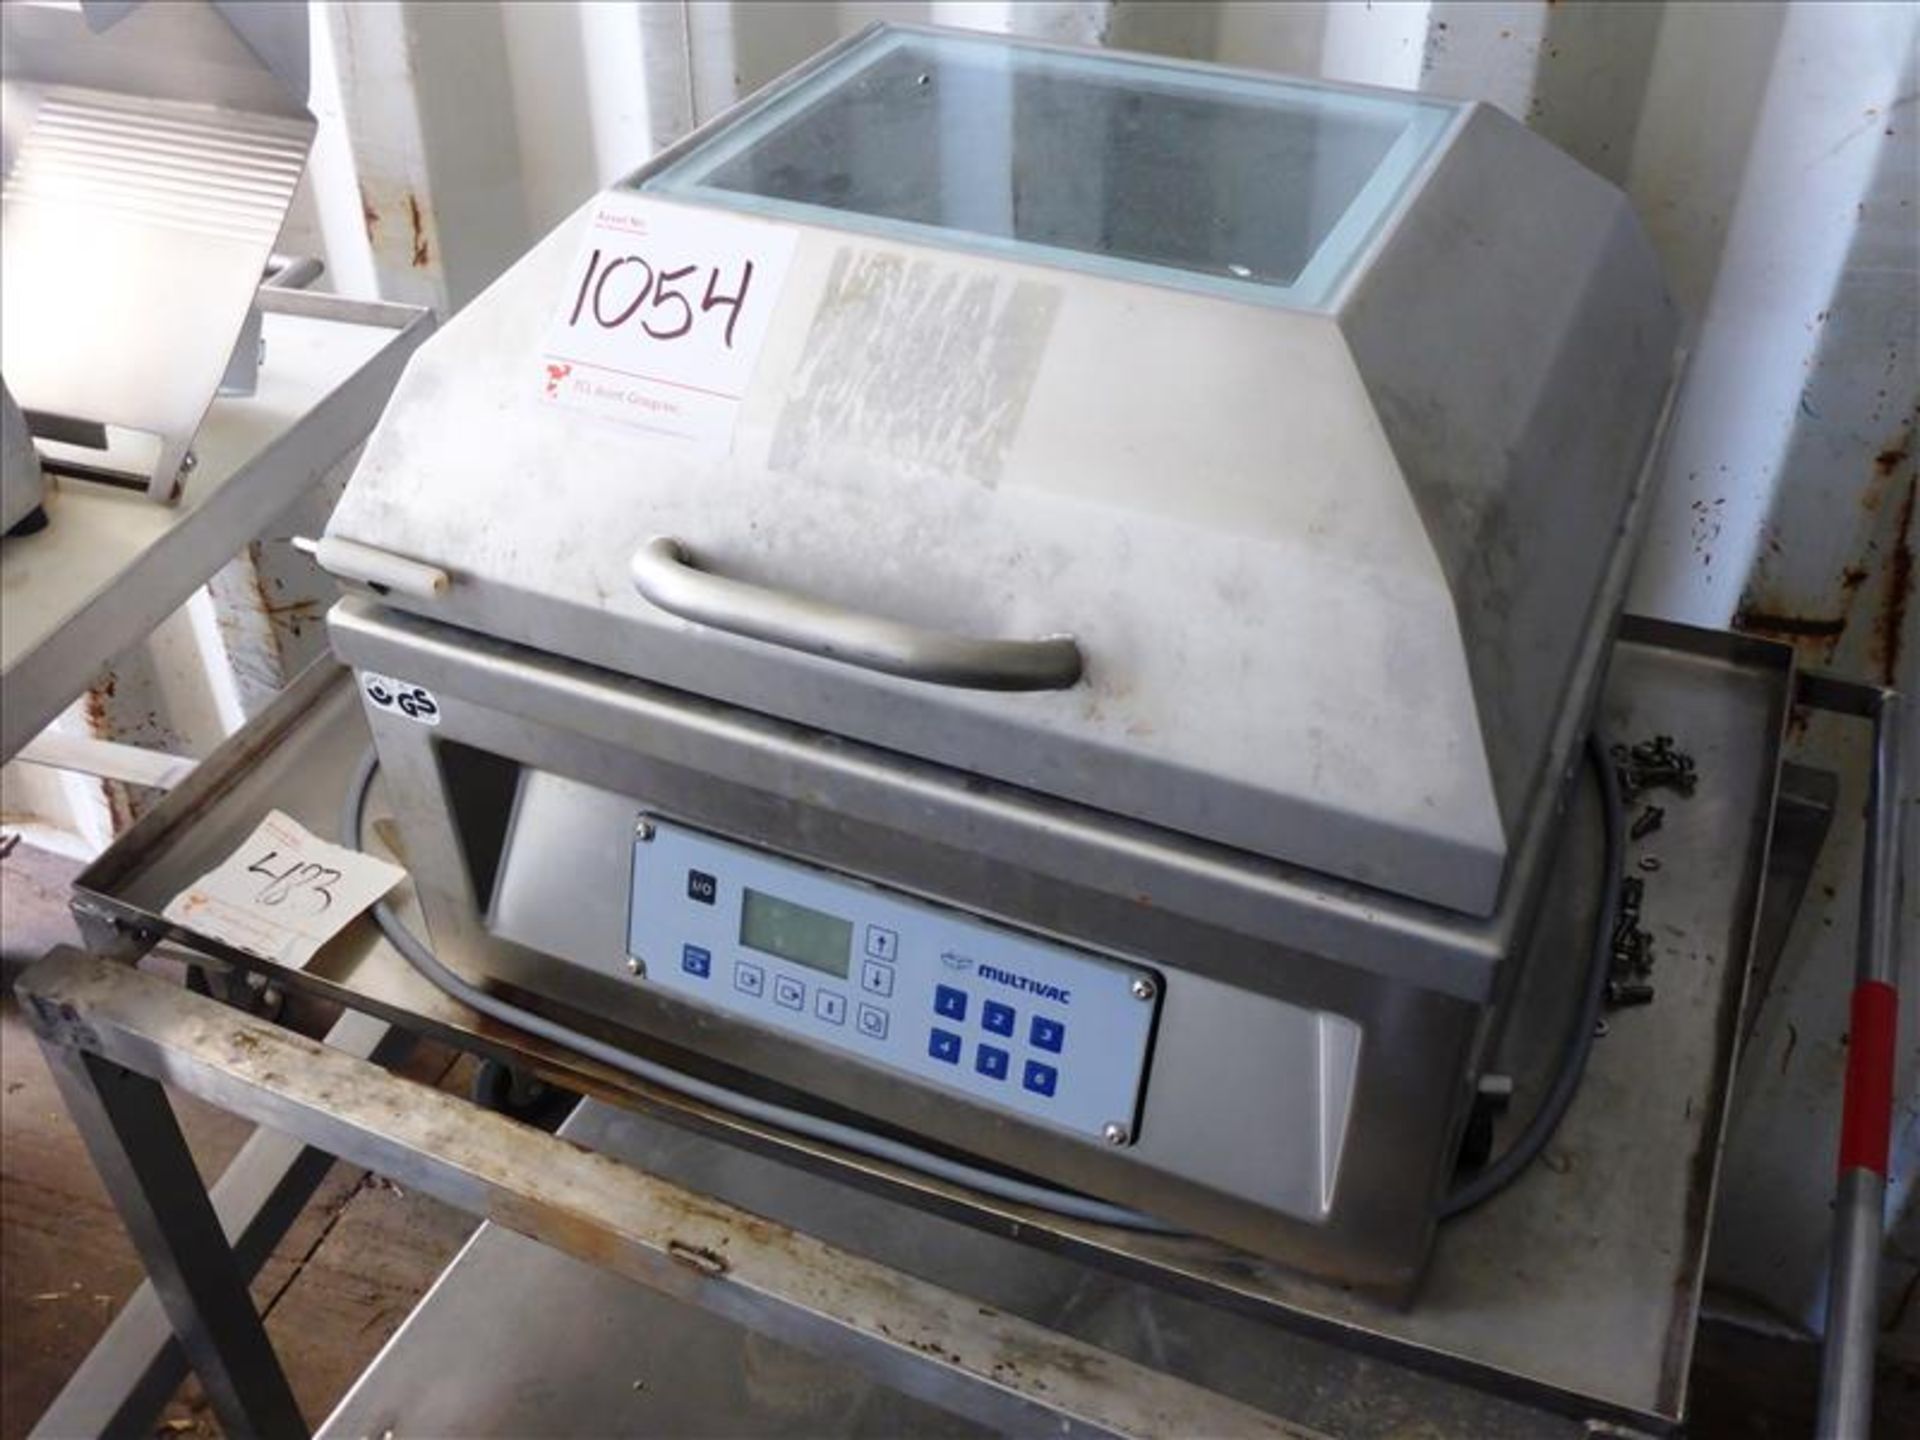 Multivac model C200, s/s vacuum packer, ser. no. 154034 (2011) c/w cart on casters (Tag No. 1054)